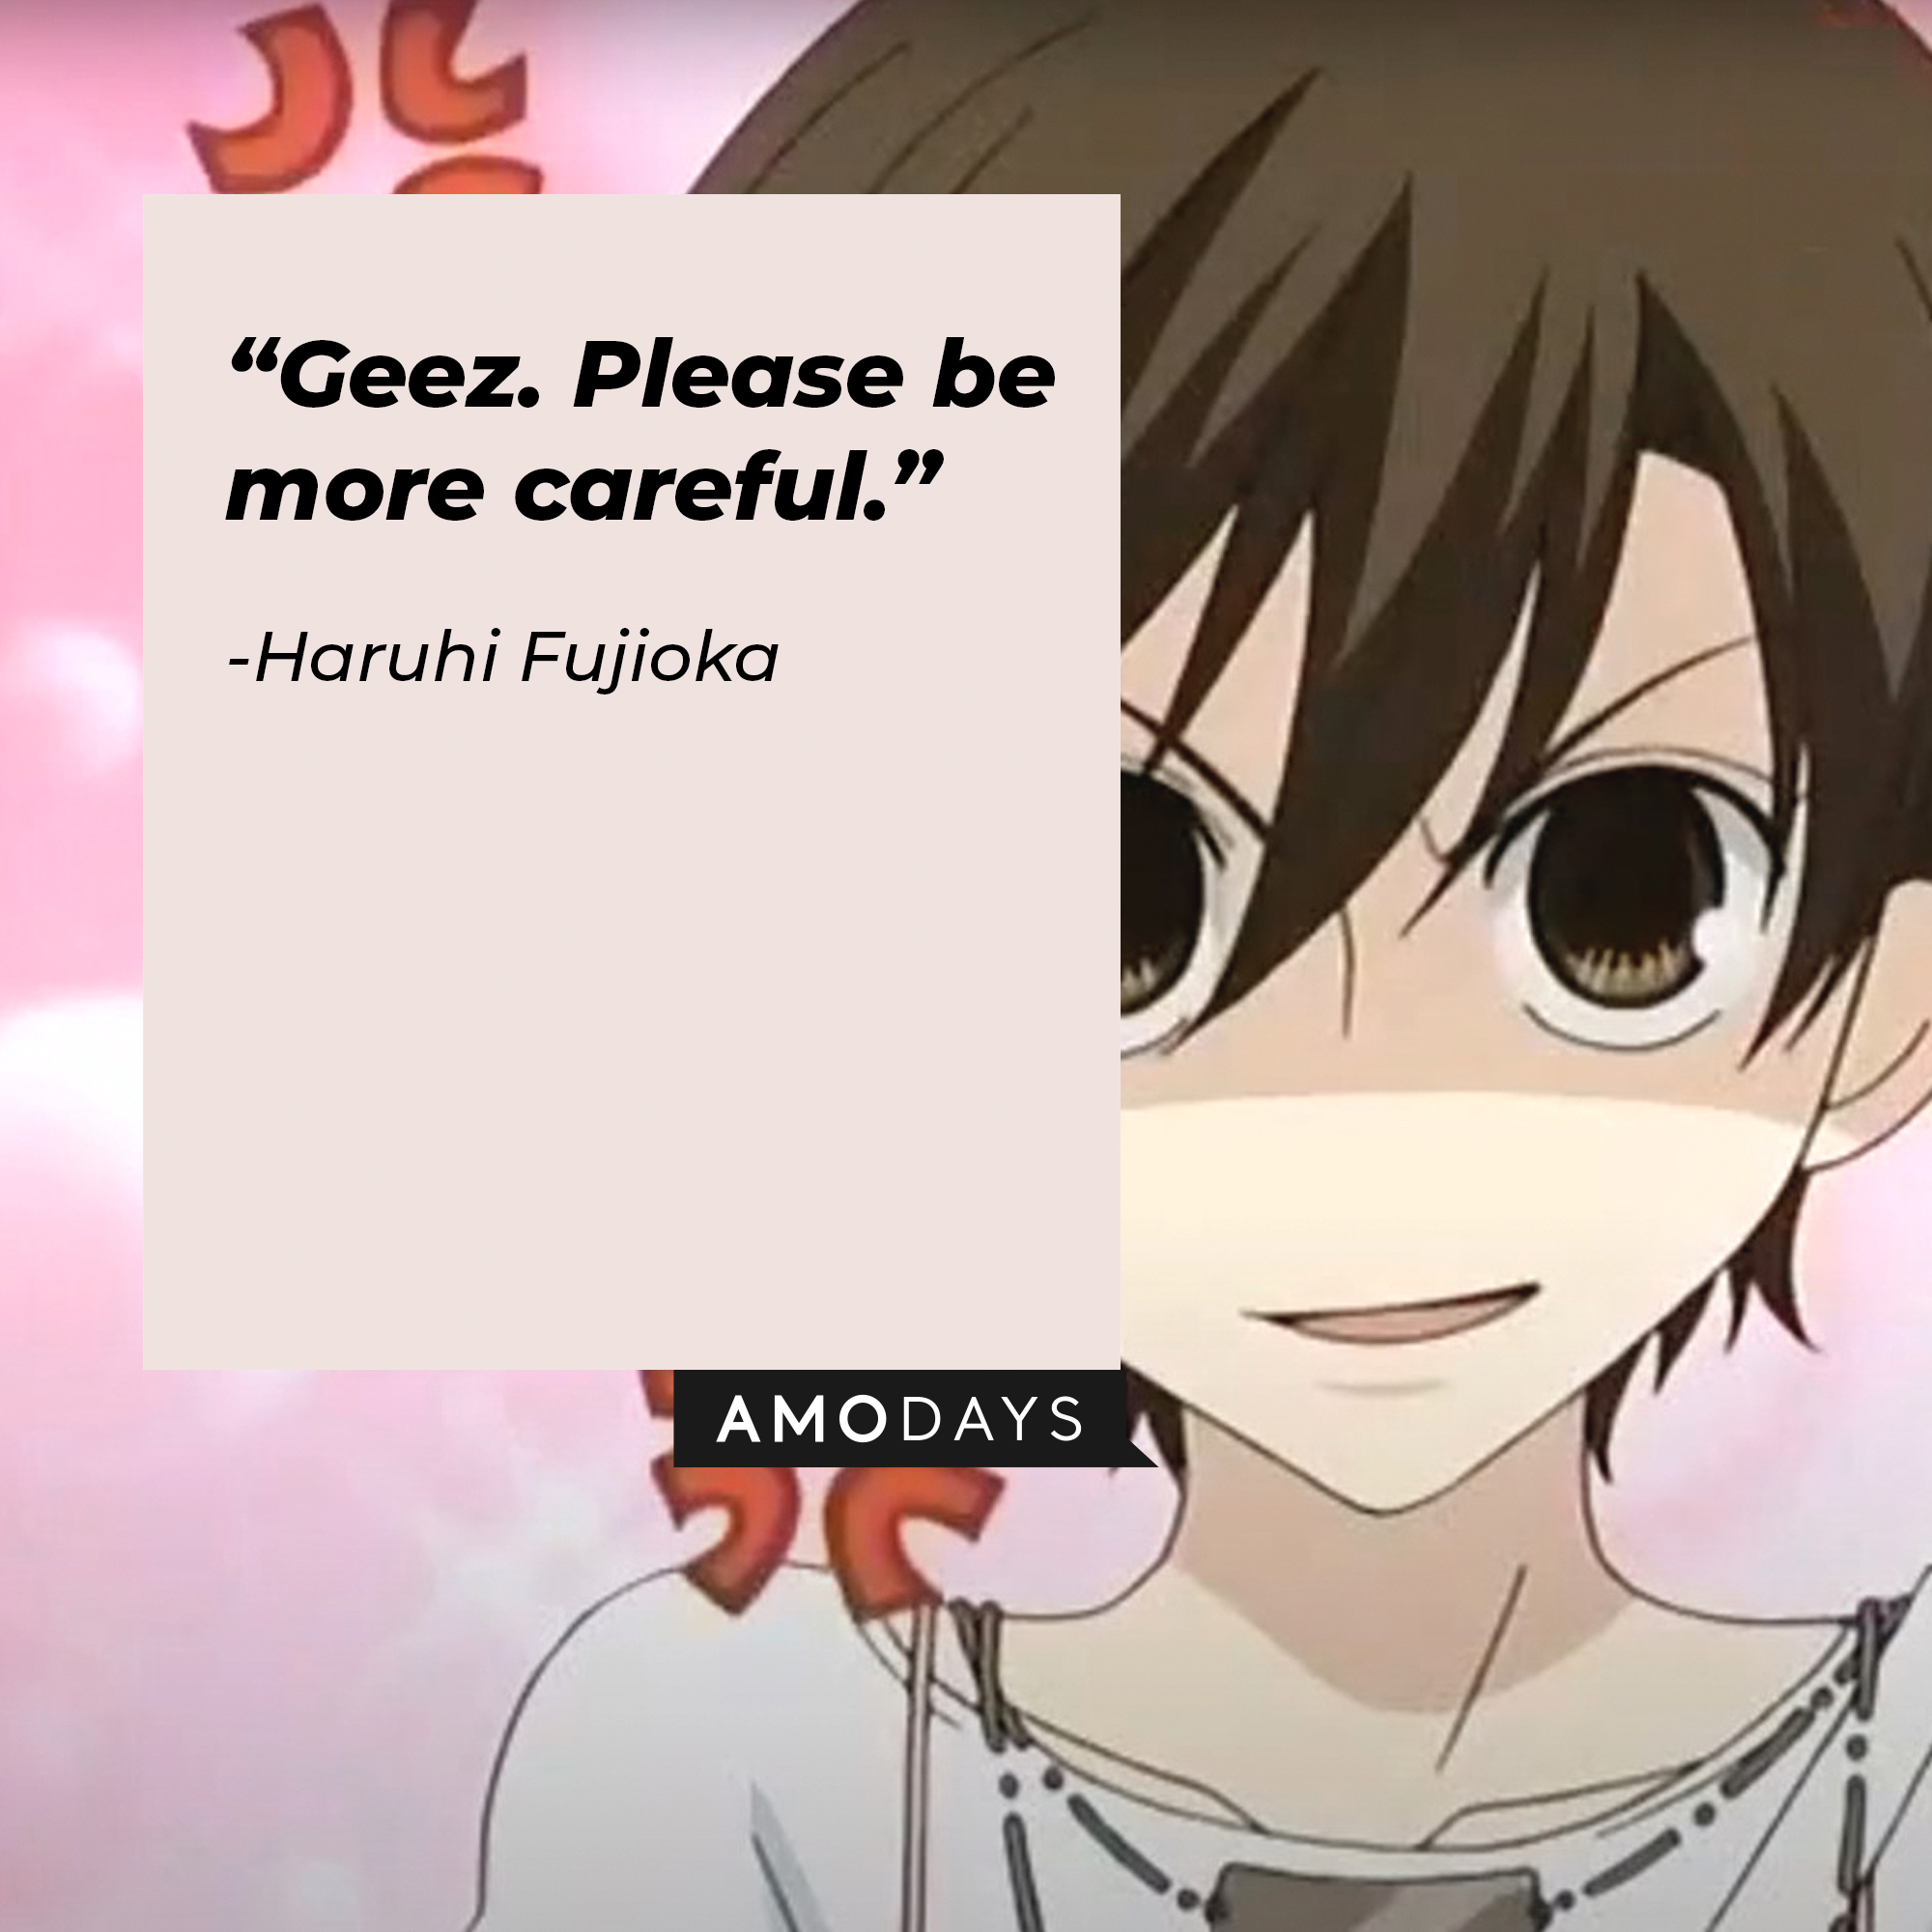 A picture of the anime character Haruhi Fujioka with a quote by her that reads, “Geez. Please be more careful.” | Image: facebook.com/theouranhostclub